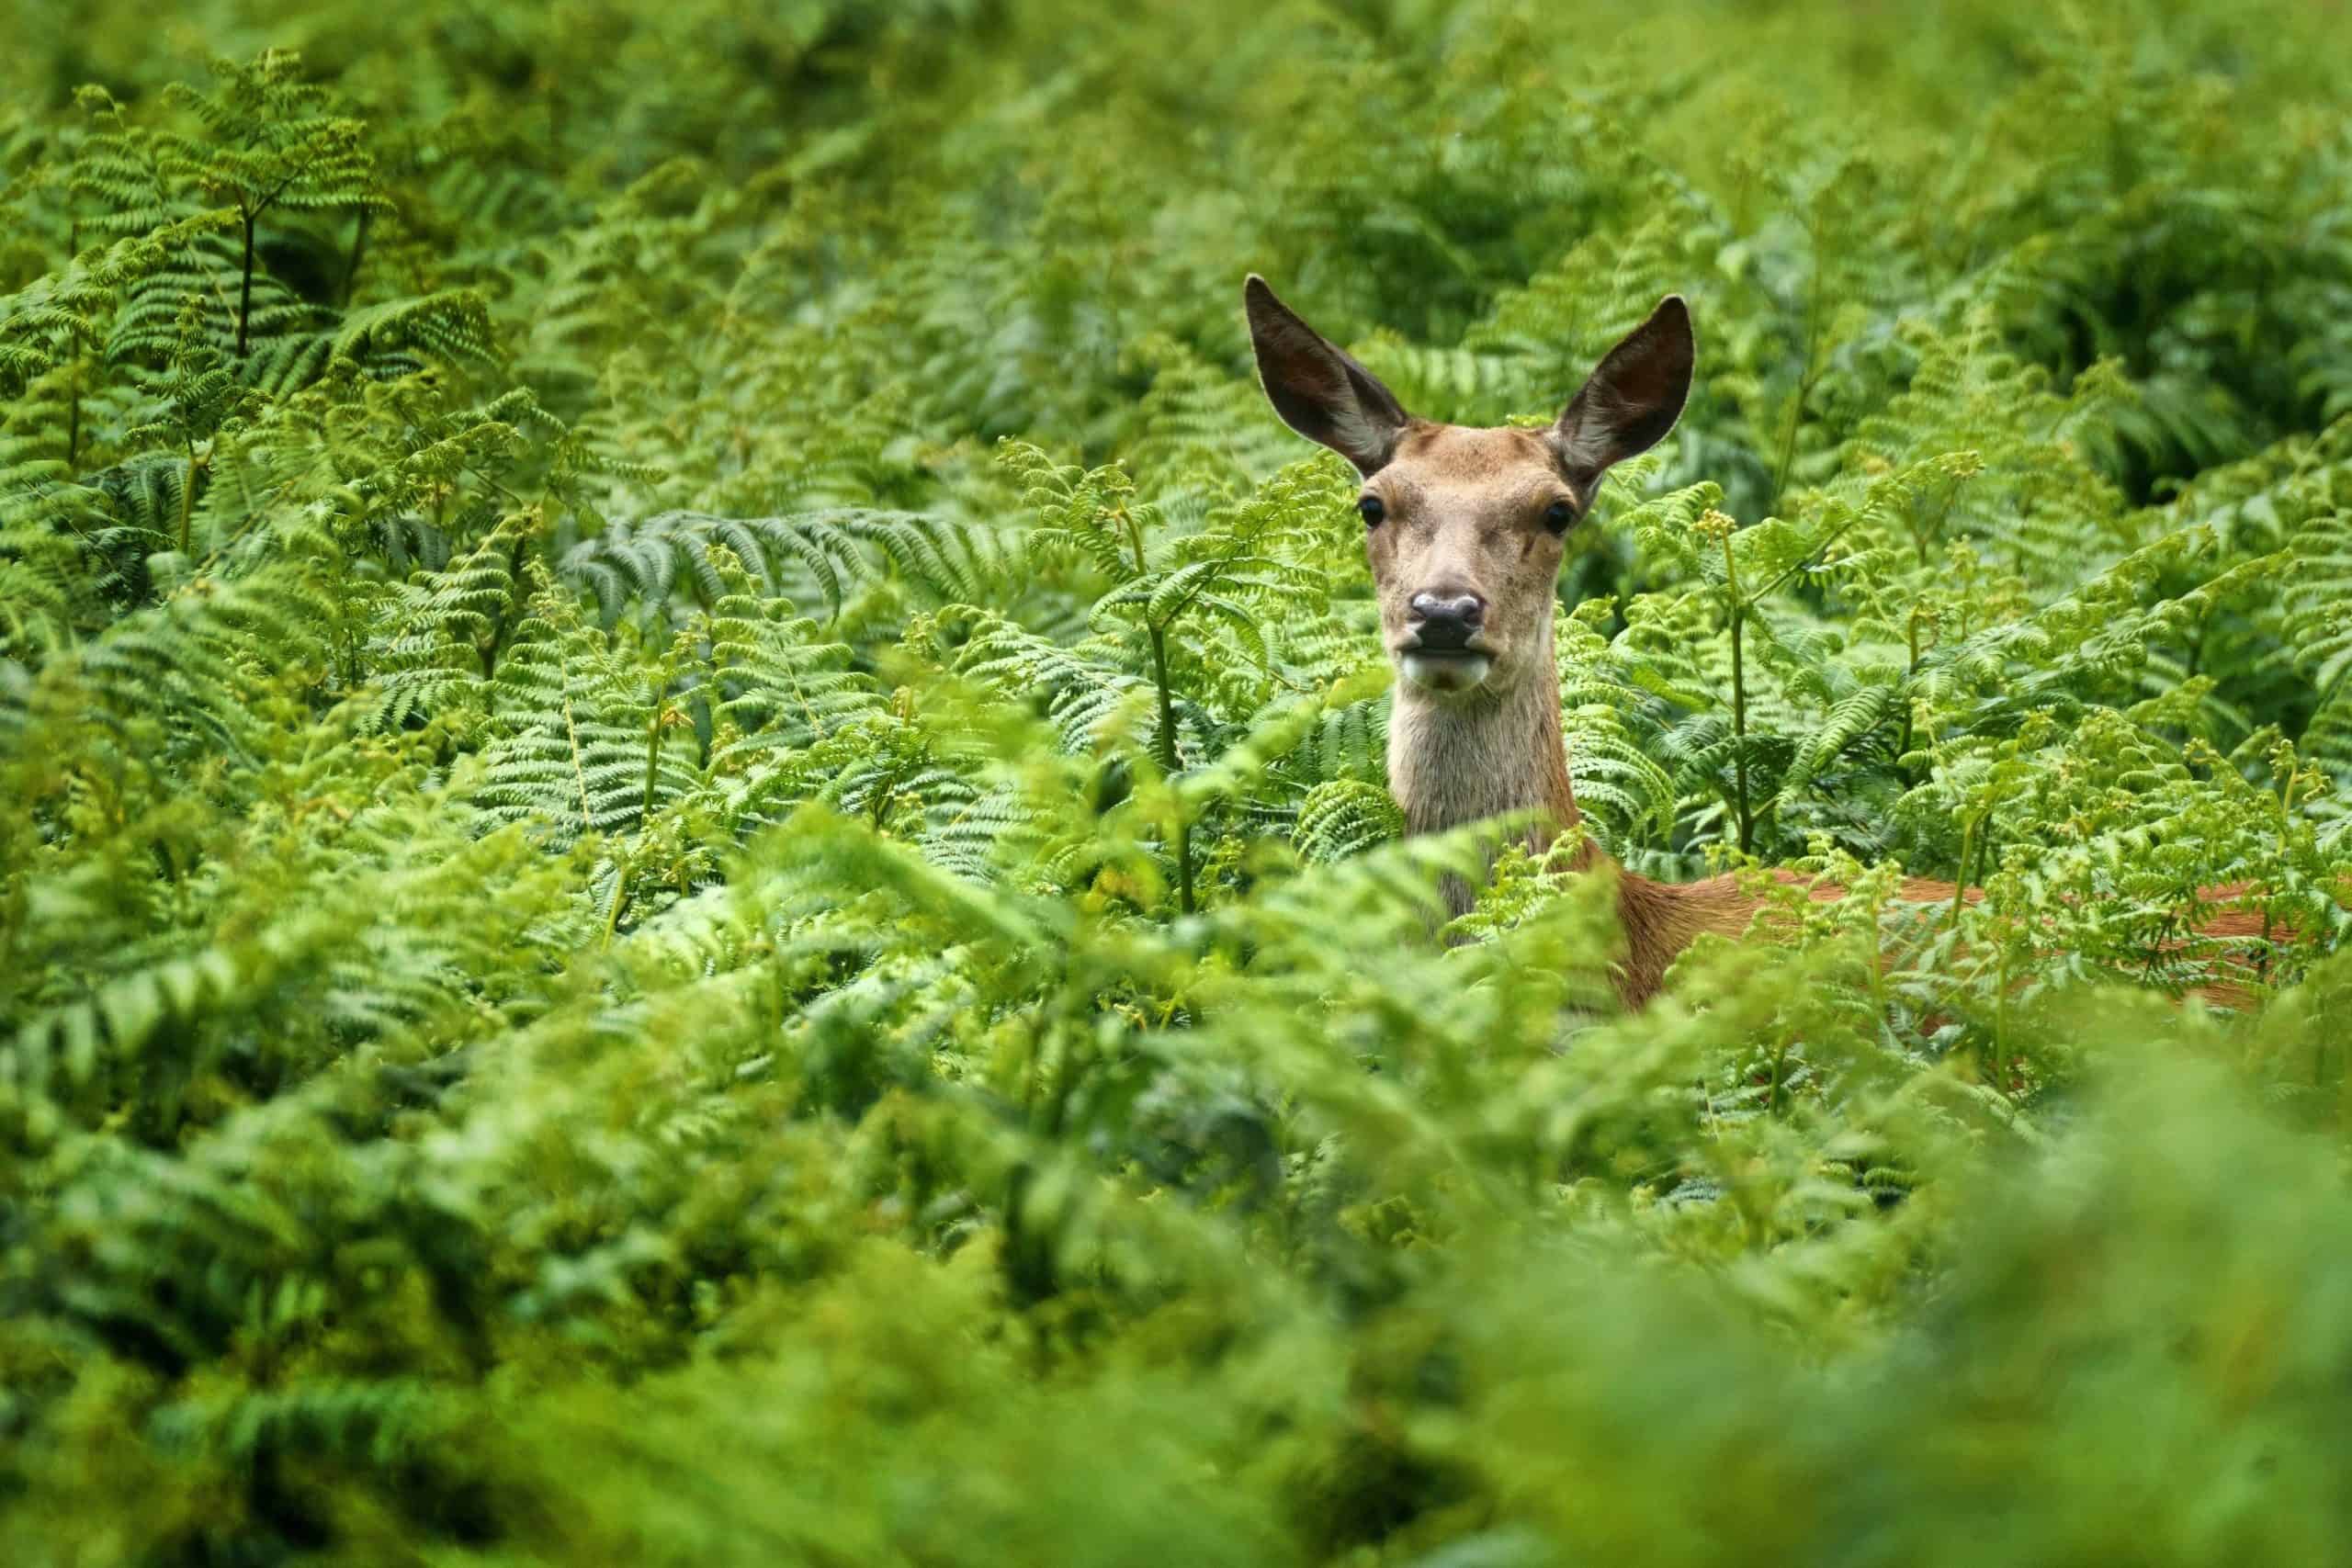 Young deer could starve if mothers shot in controversial cull